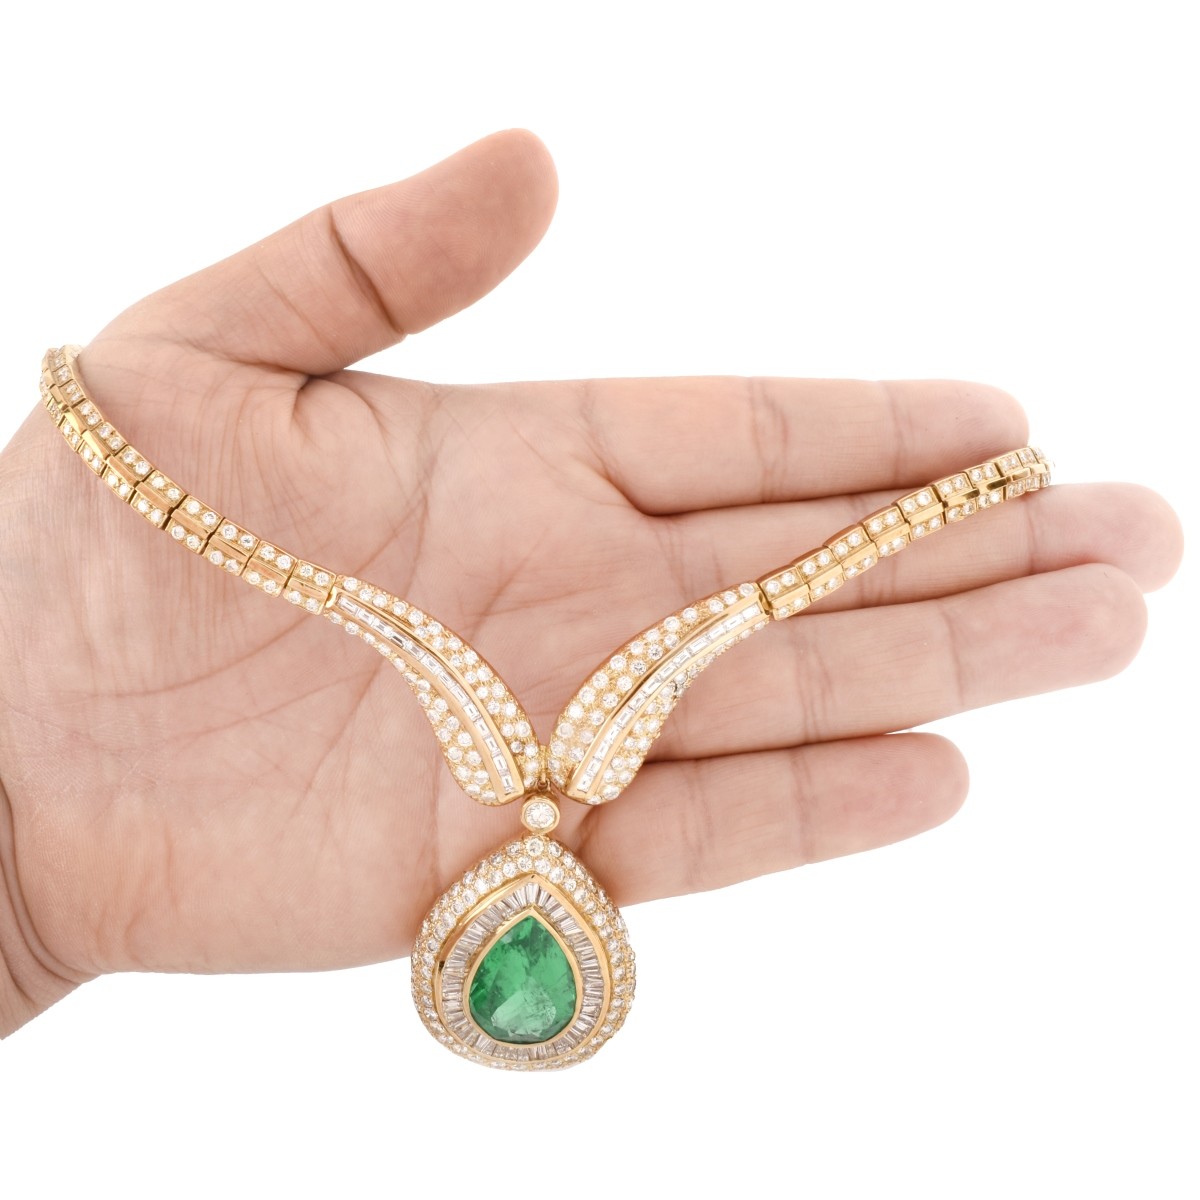 Important Emerald, Diamond and 18K Necklace